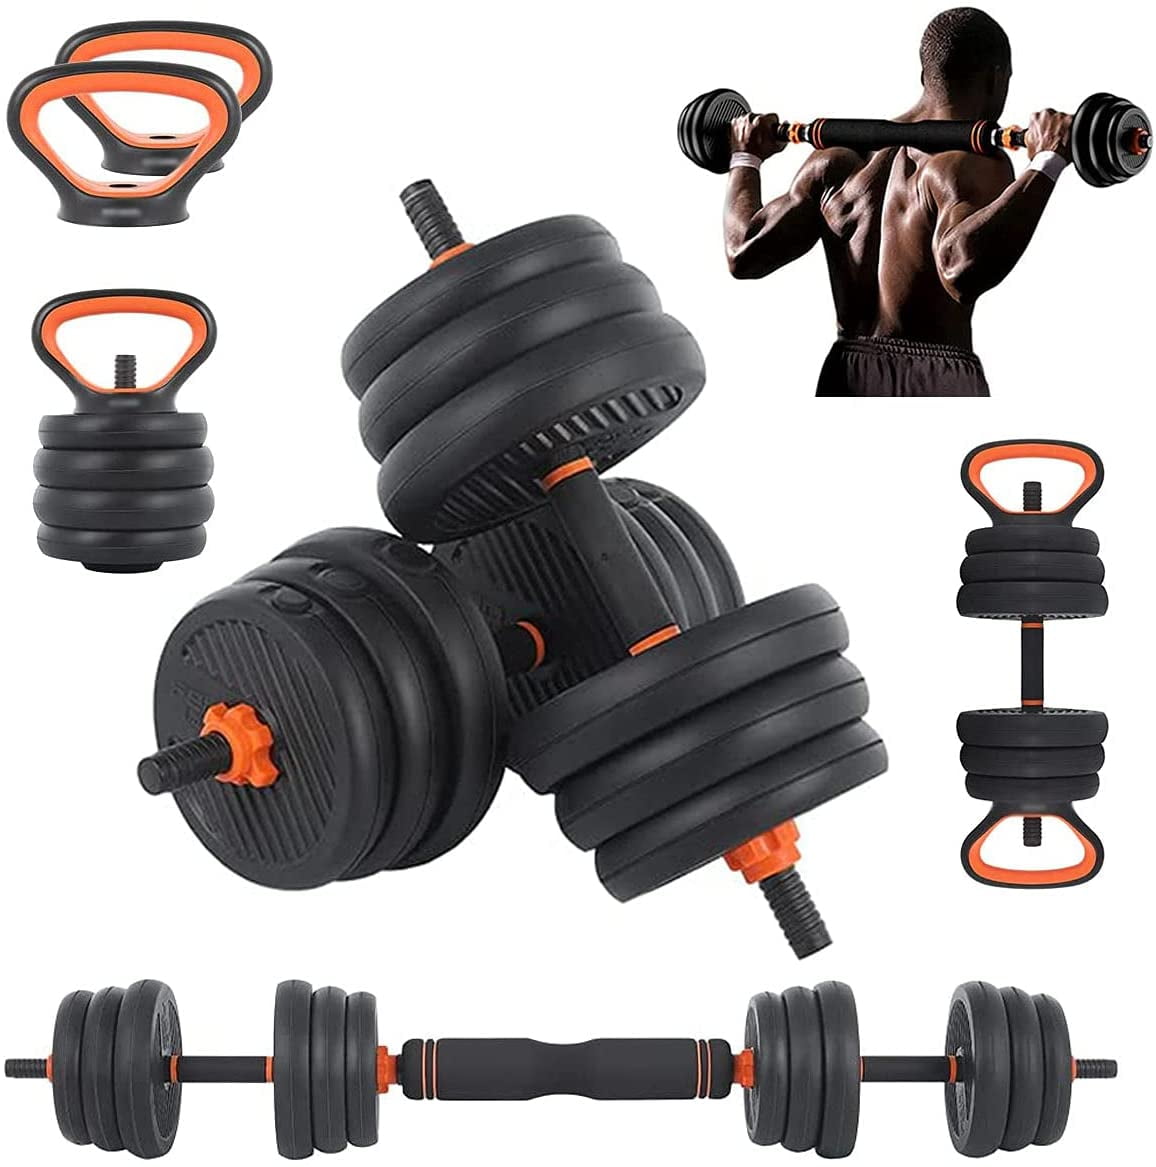 10-20KG PAIR WEIGHT BARBELL/DUMBBELL FITNES BODY BUILDING HOME TRAINING BAR SET 